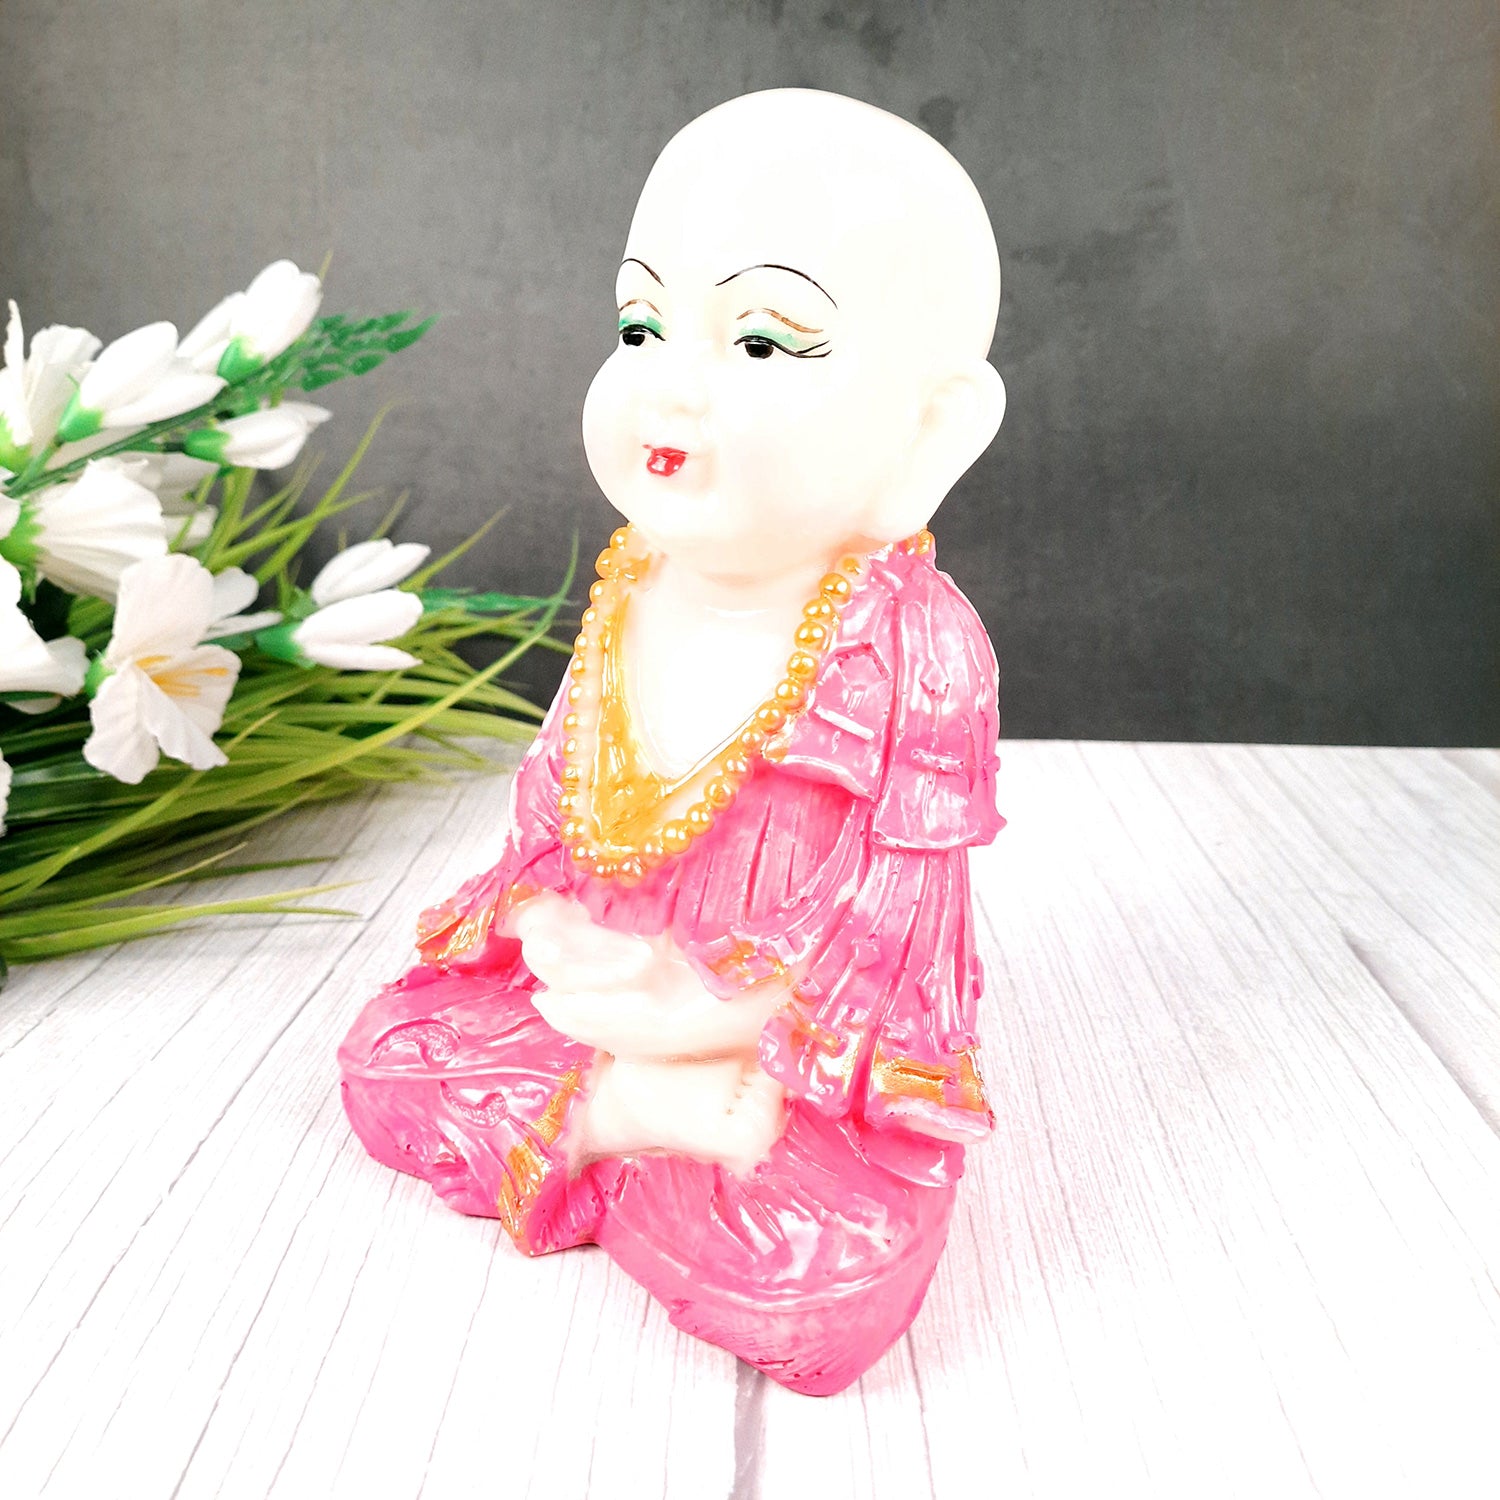 Baby Monk Showpiece Set | Baby Buddha Feng Shui Decor - For Good Luck, Home, Table, Office Decor & Gift - 9 Inch (Pack of 3)